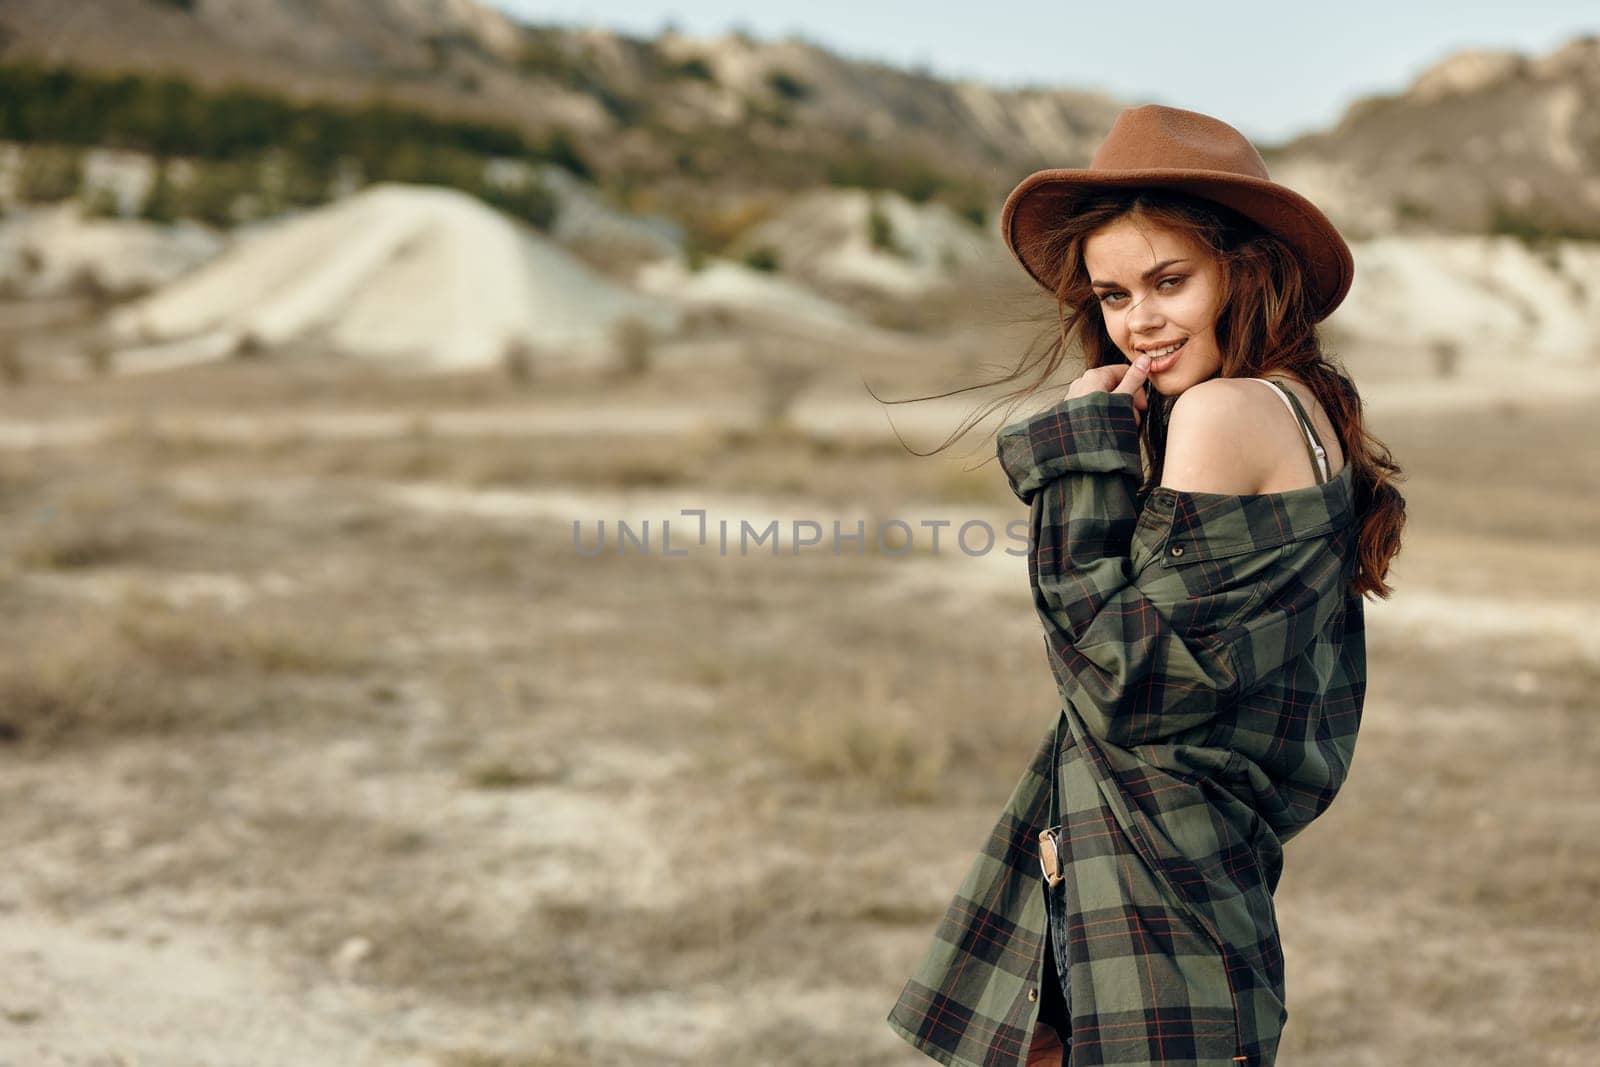 Woman in plaid shirt and hat standing in desert with majestic mountains in background on sunny day